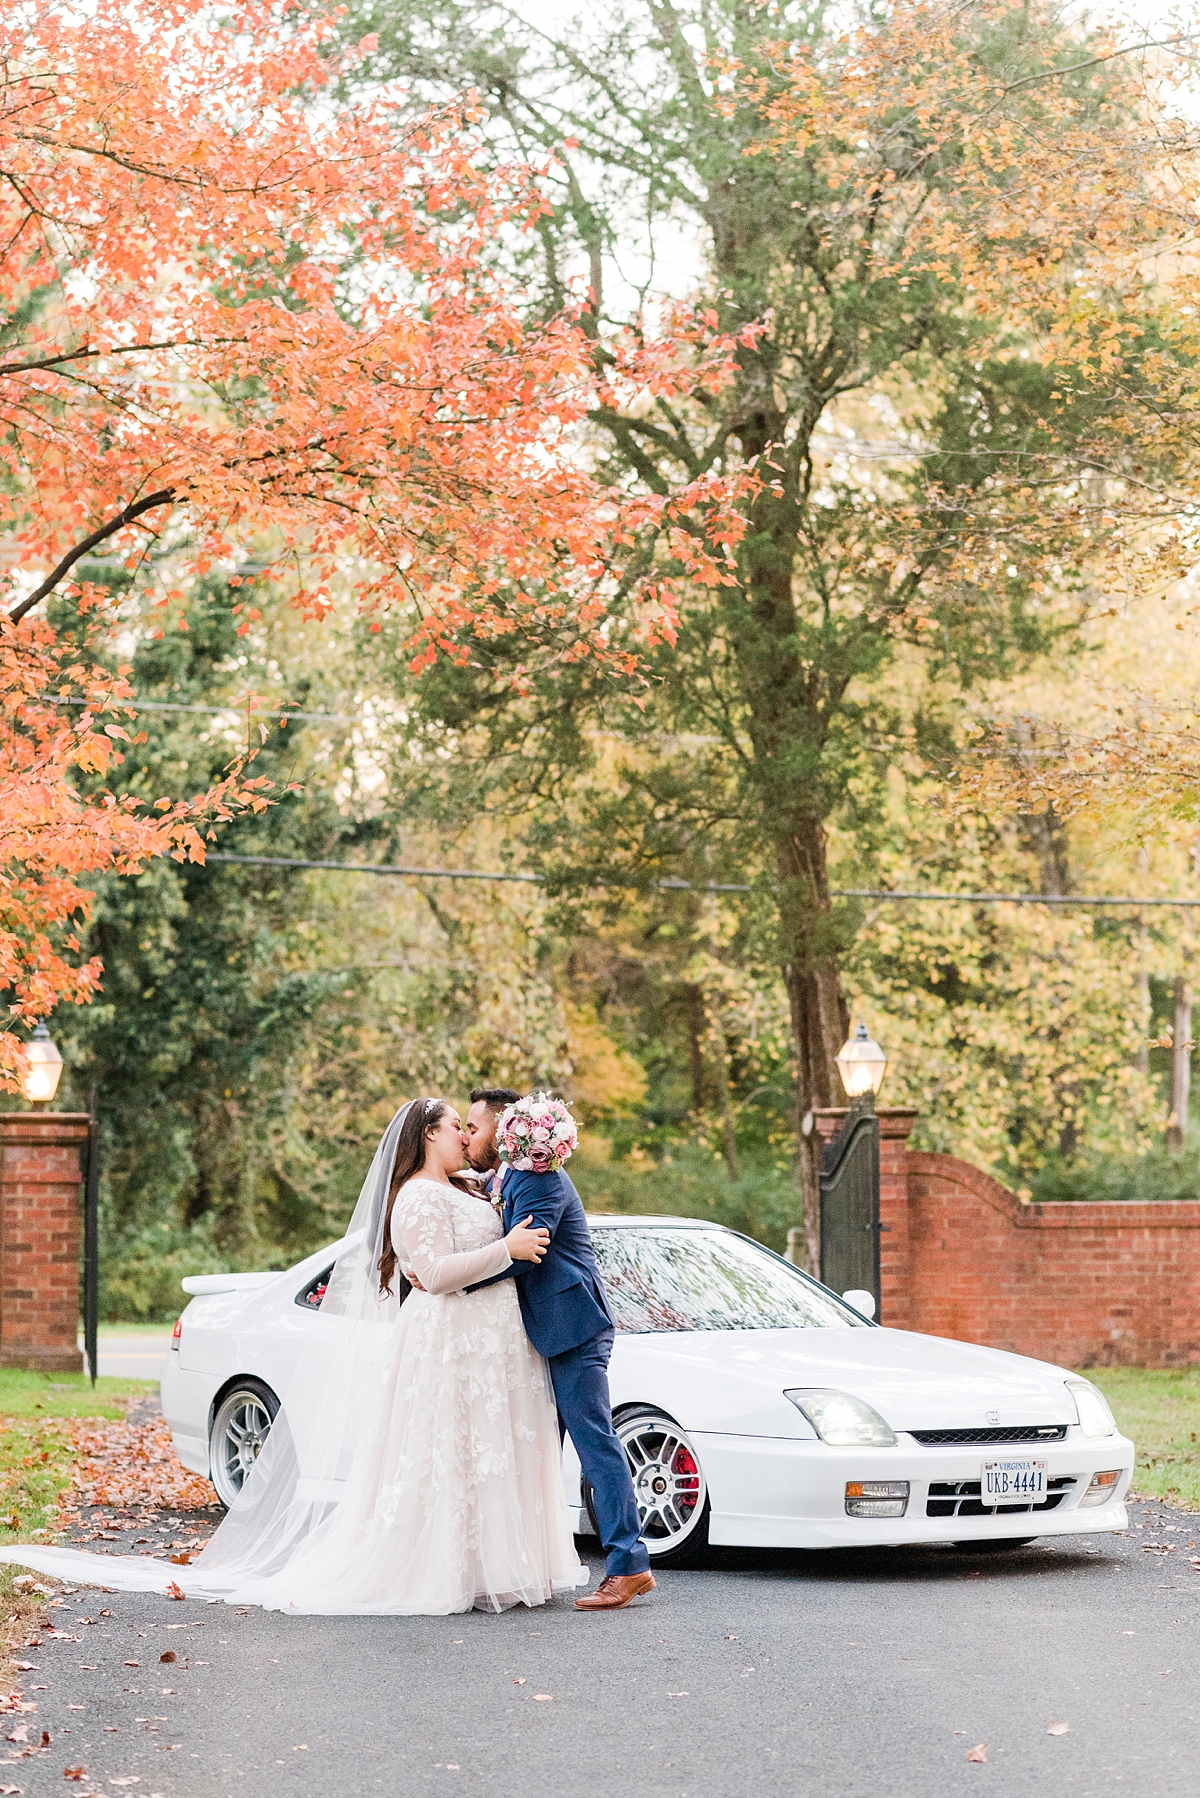 Bride and Groom Portraits with Getaway Car at Virginia Cliffe Inn Wedding. Wedding Photography by Richmond Wedding Photographer Kailey Brianne Photography.